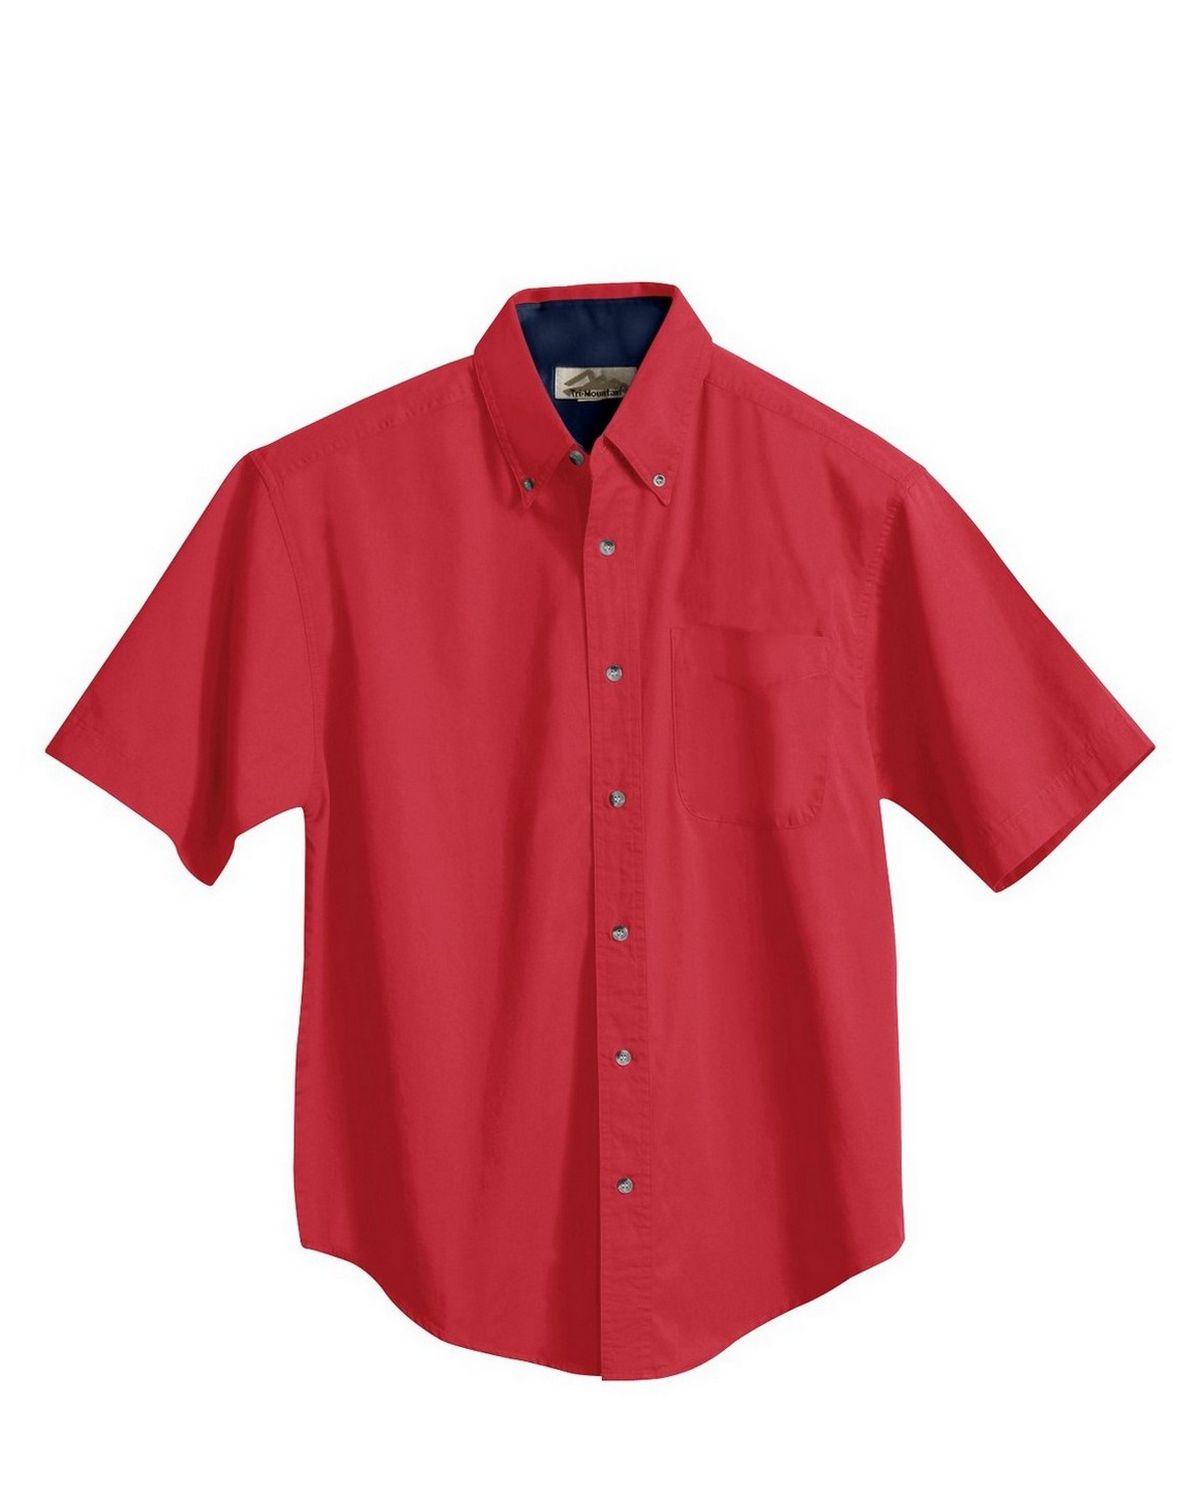 Buy Tri-Mountain 788 Valor Cotton Short sleeve Peached Twill Shirt